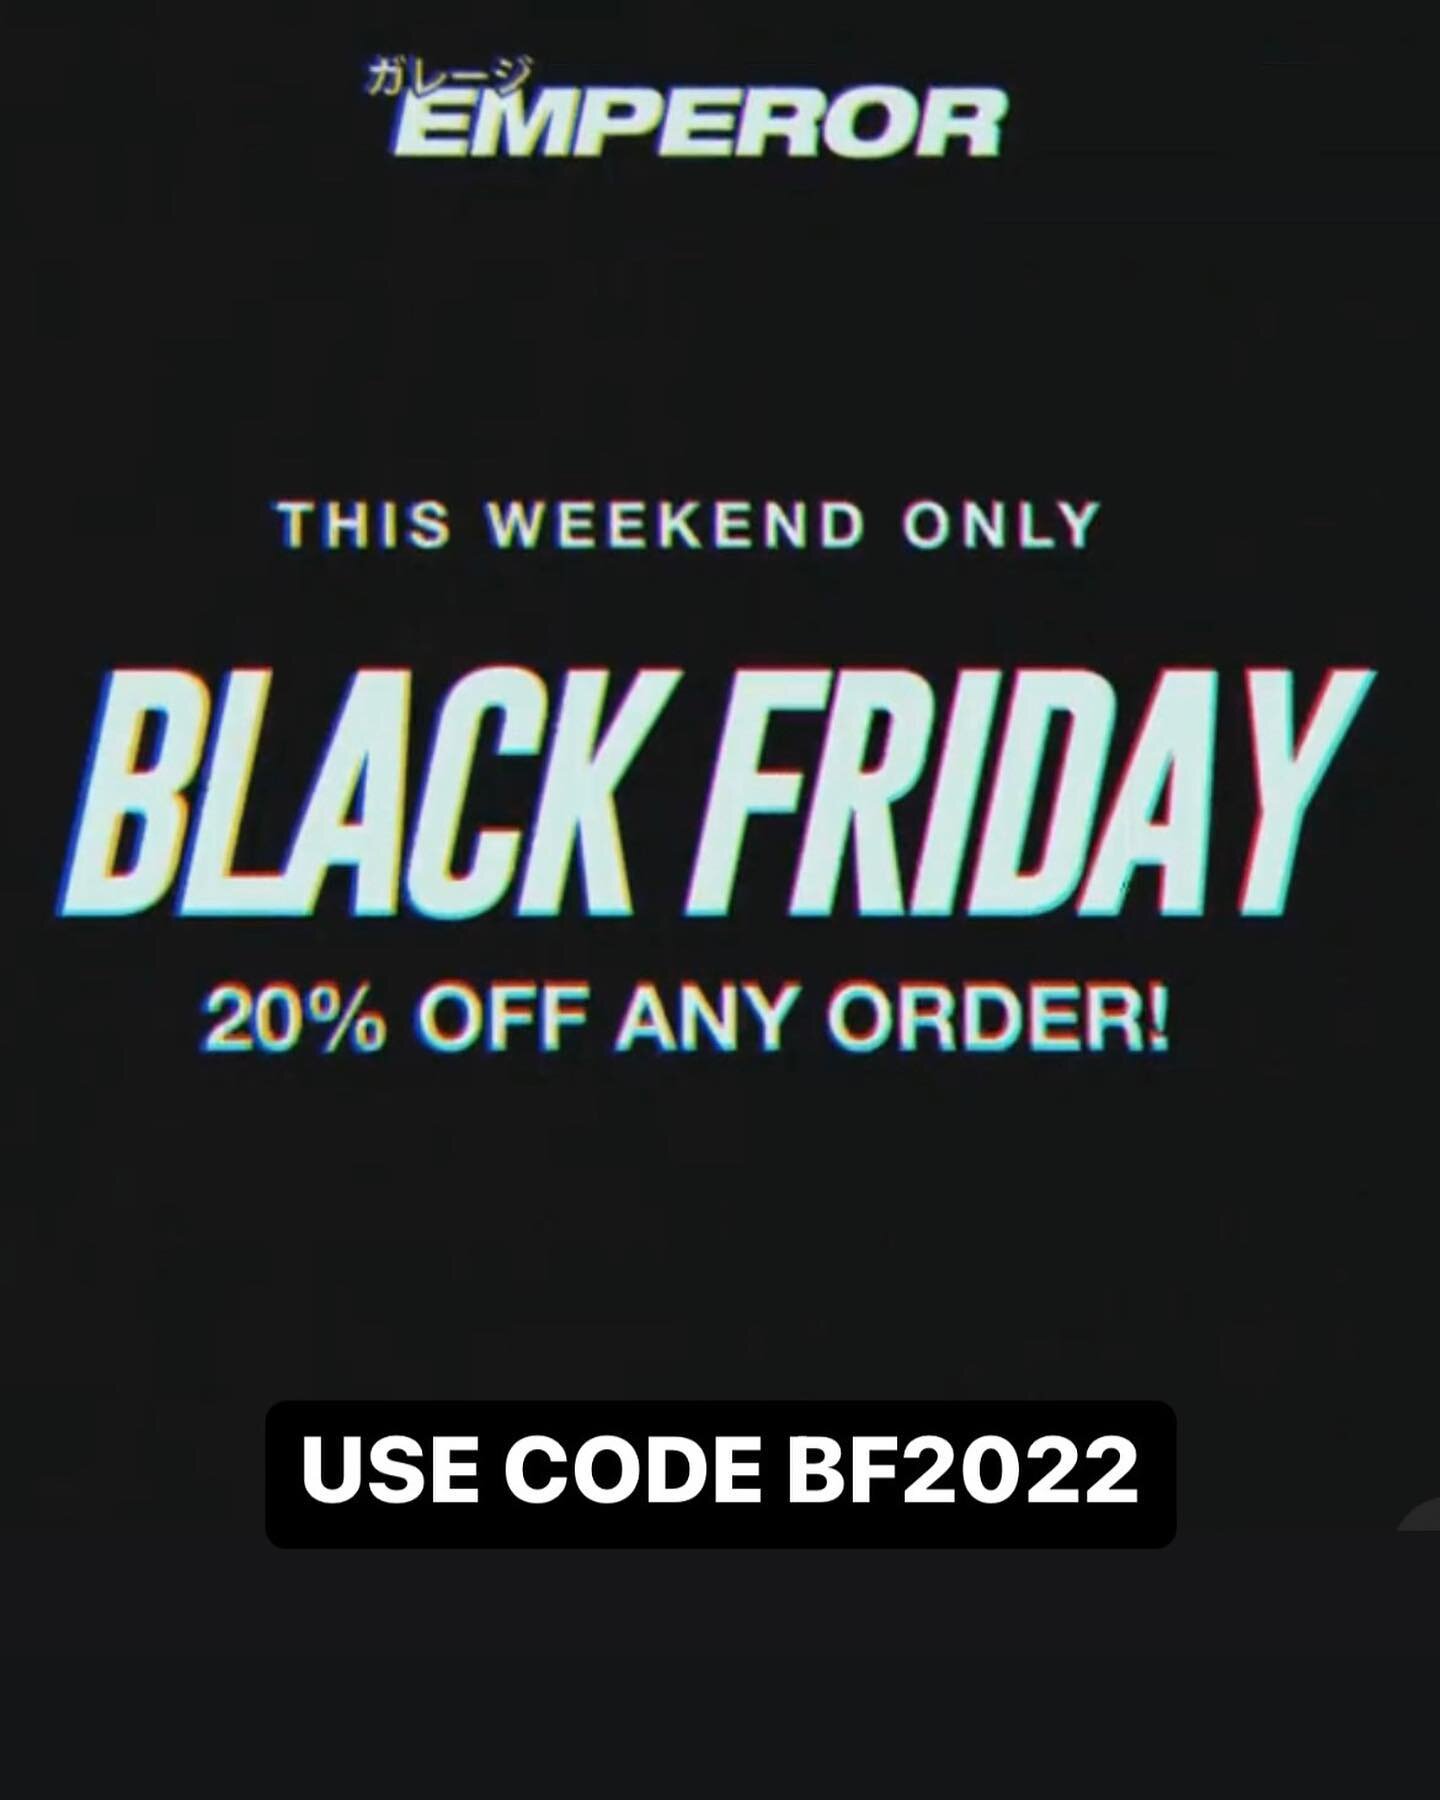 Black Friday deals are here! Get 20% off  any order from tonight at midnight, until midnight Monday. Use code &quot;BF2022&quot; at checkout. All orders purchased during this time will be processed and shipped out on the days following. Thanks again 